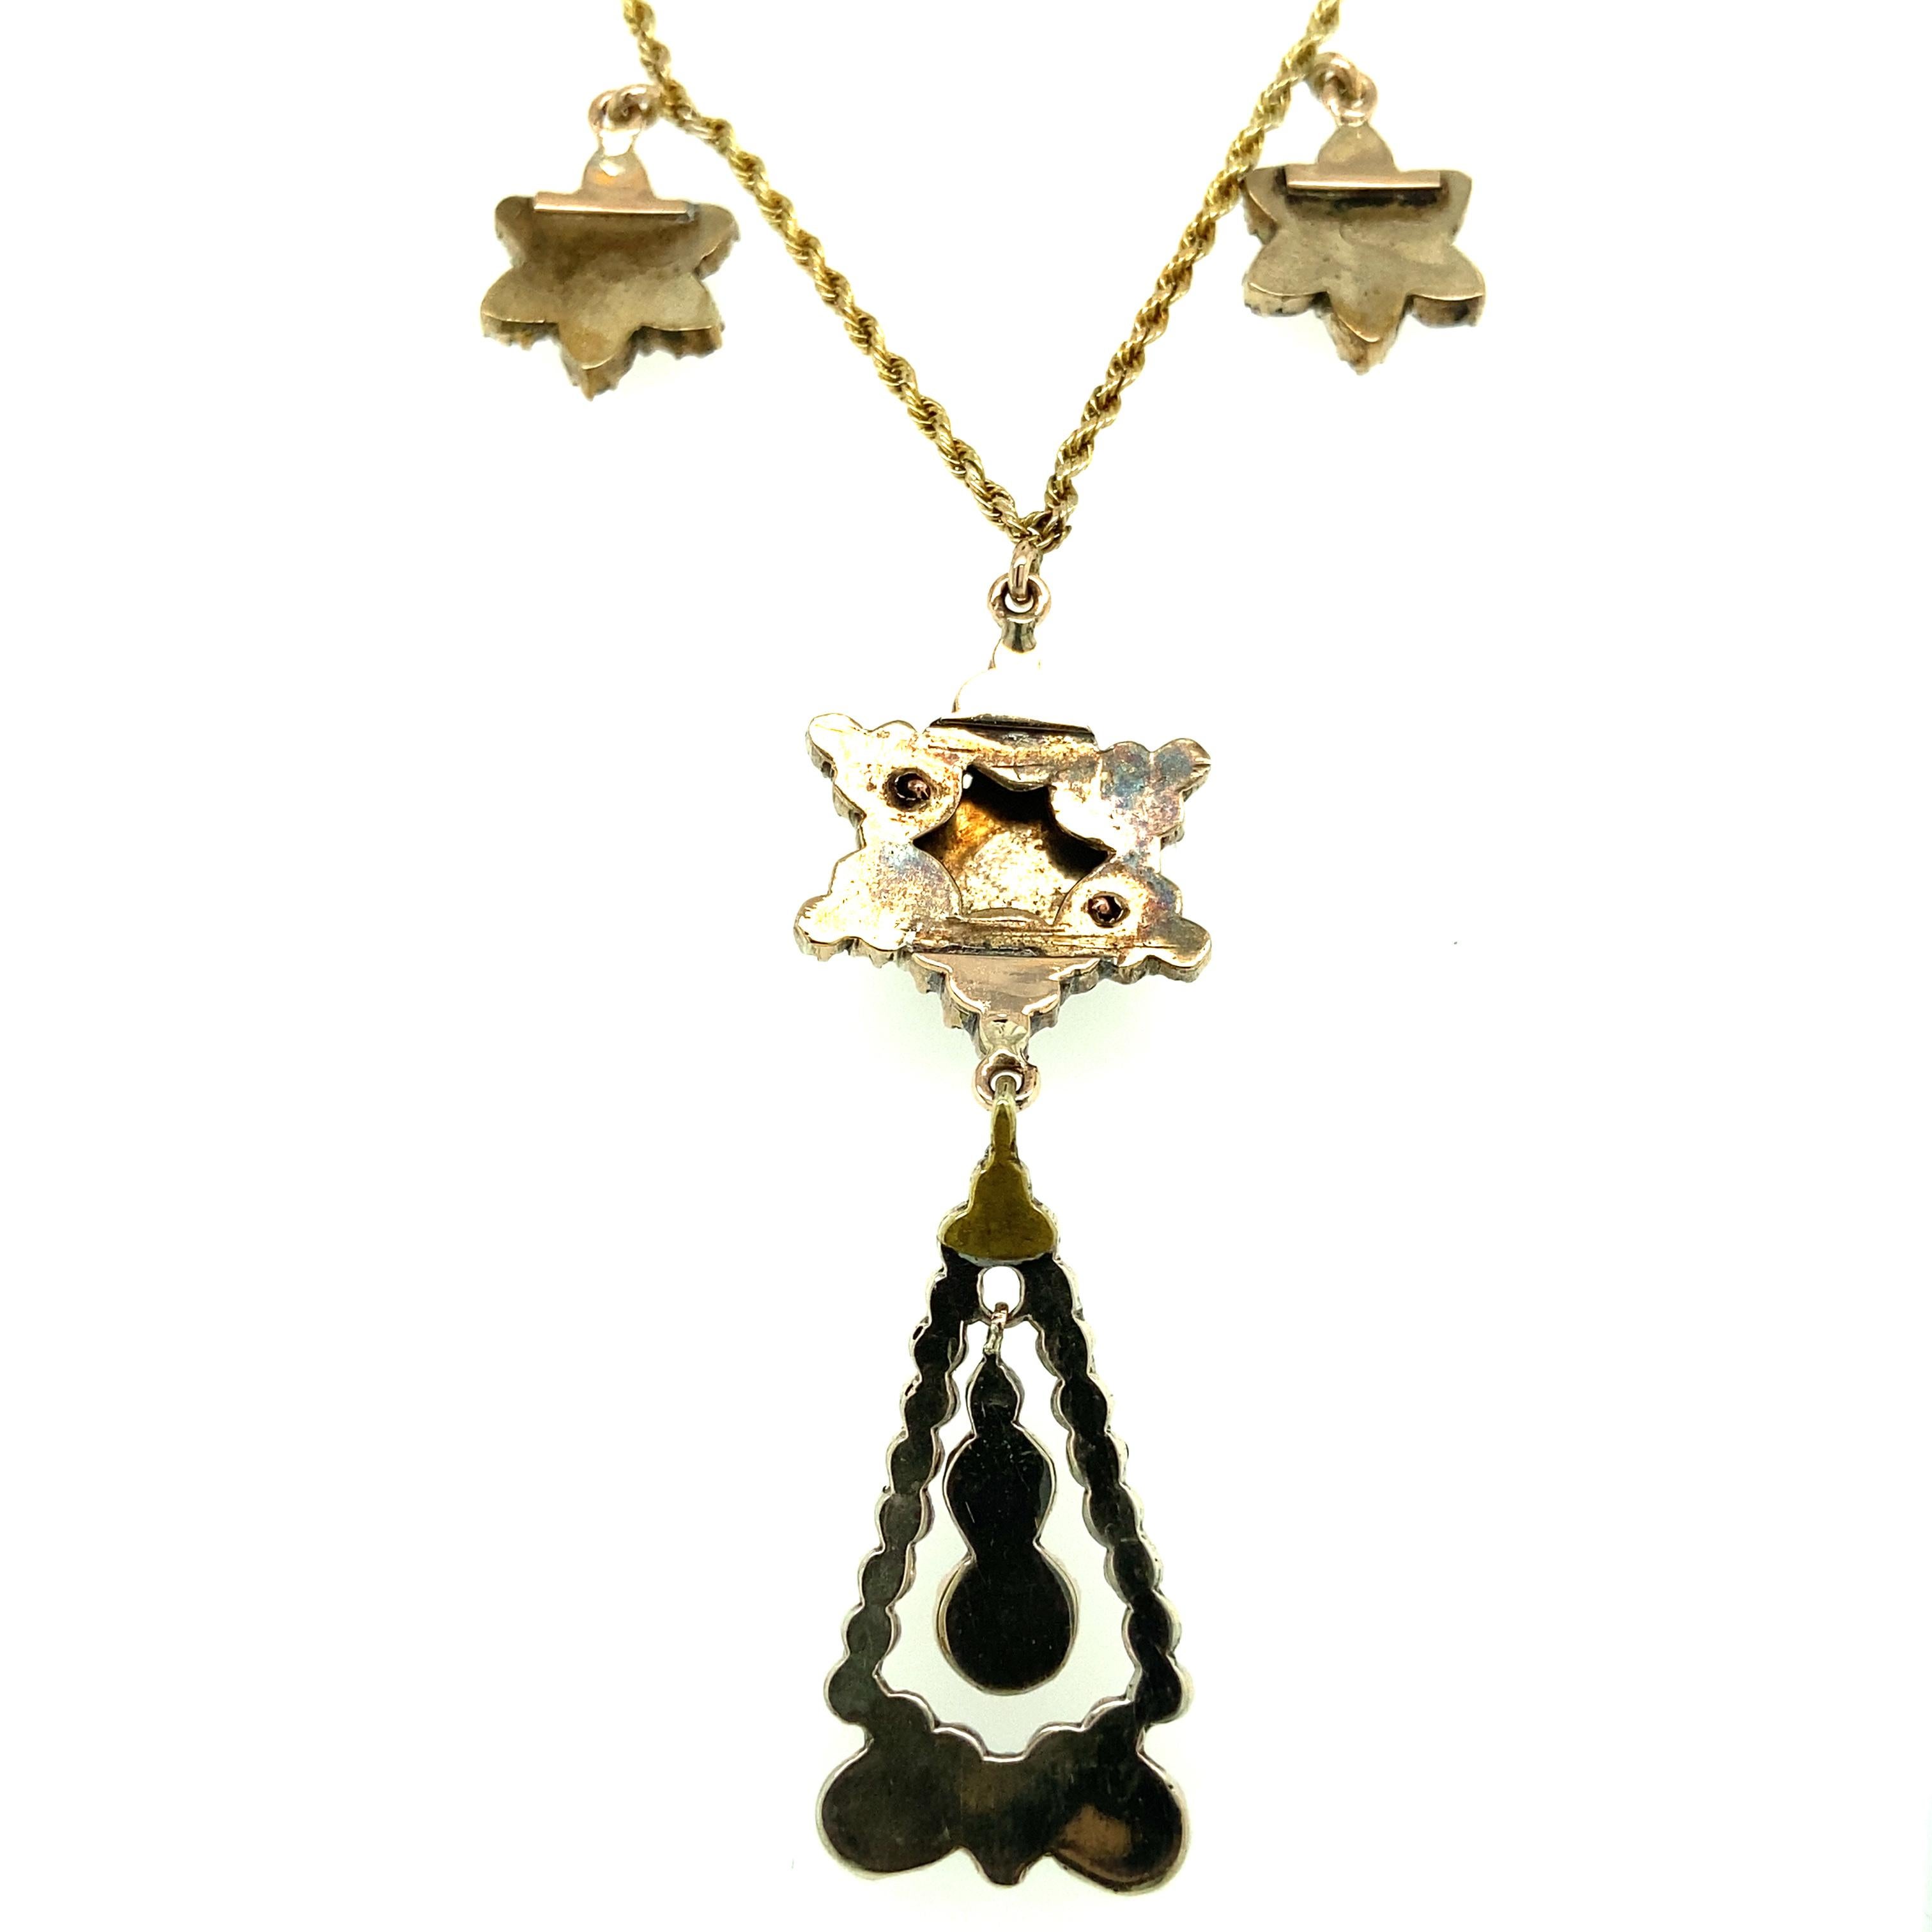 One 10 karat yellow gold and silver triple cluster garnet pendant necklace,  set with seventy-six garnets. Each pendant is suspended from a 10 karat yellow gold 14 inch rope chain with barrel clasp. 
